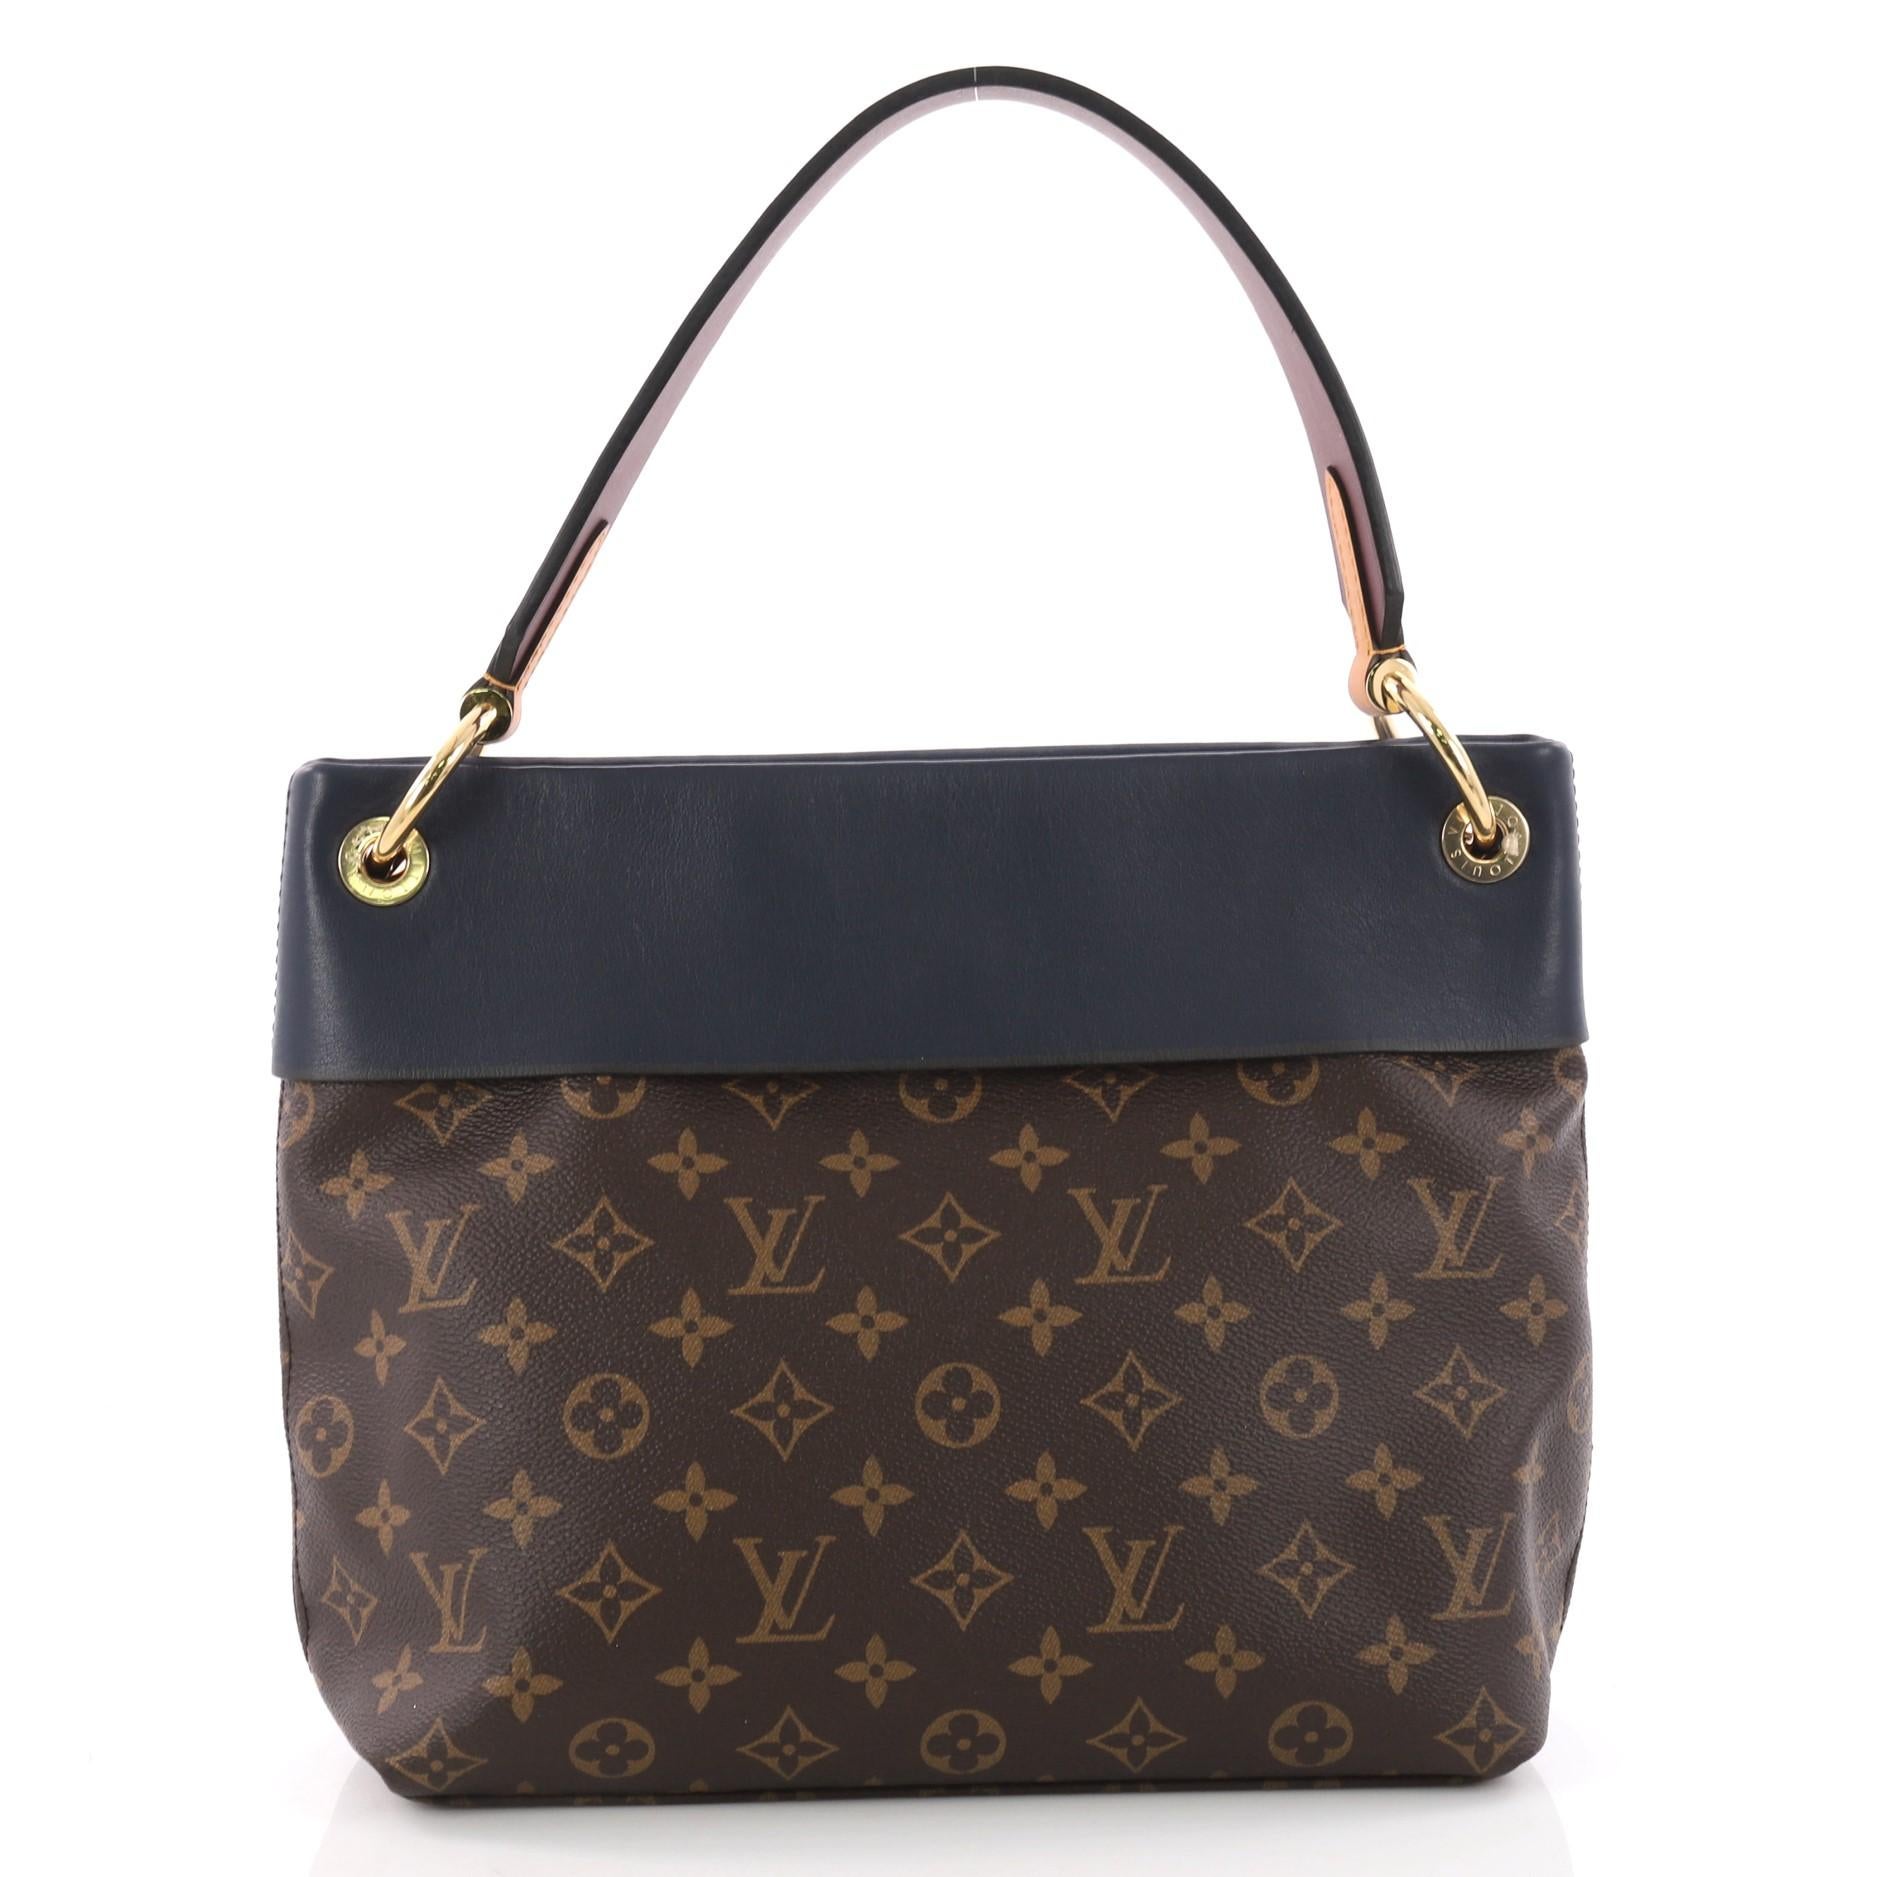 Black Louis Vuitton Tuileries Besace Bag Monogram Canvas with Leather